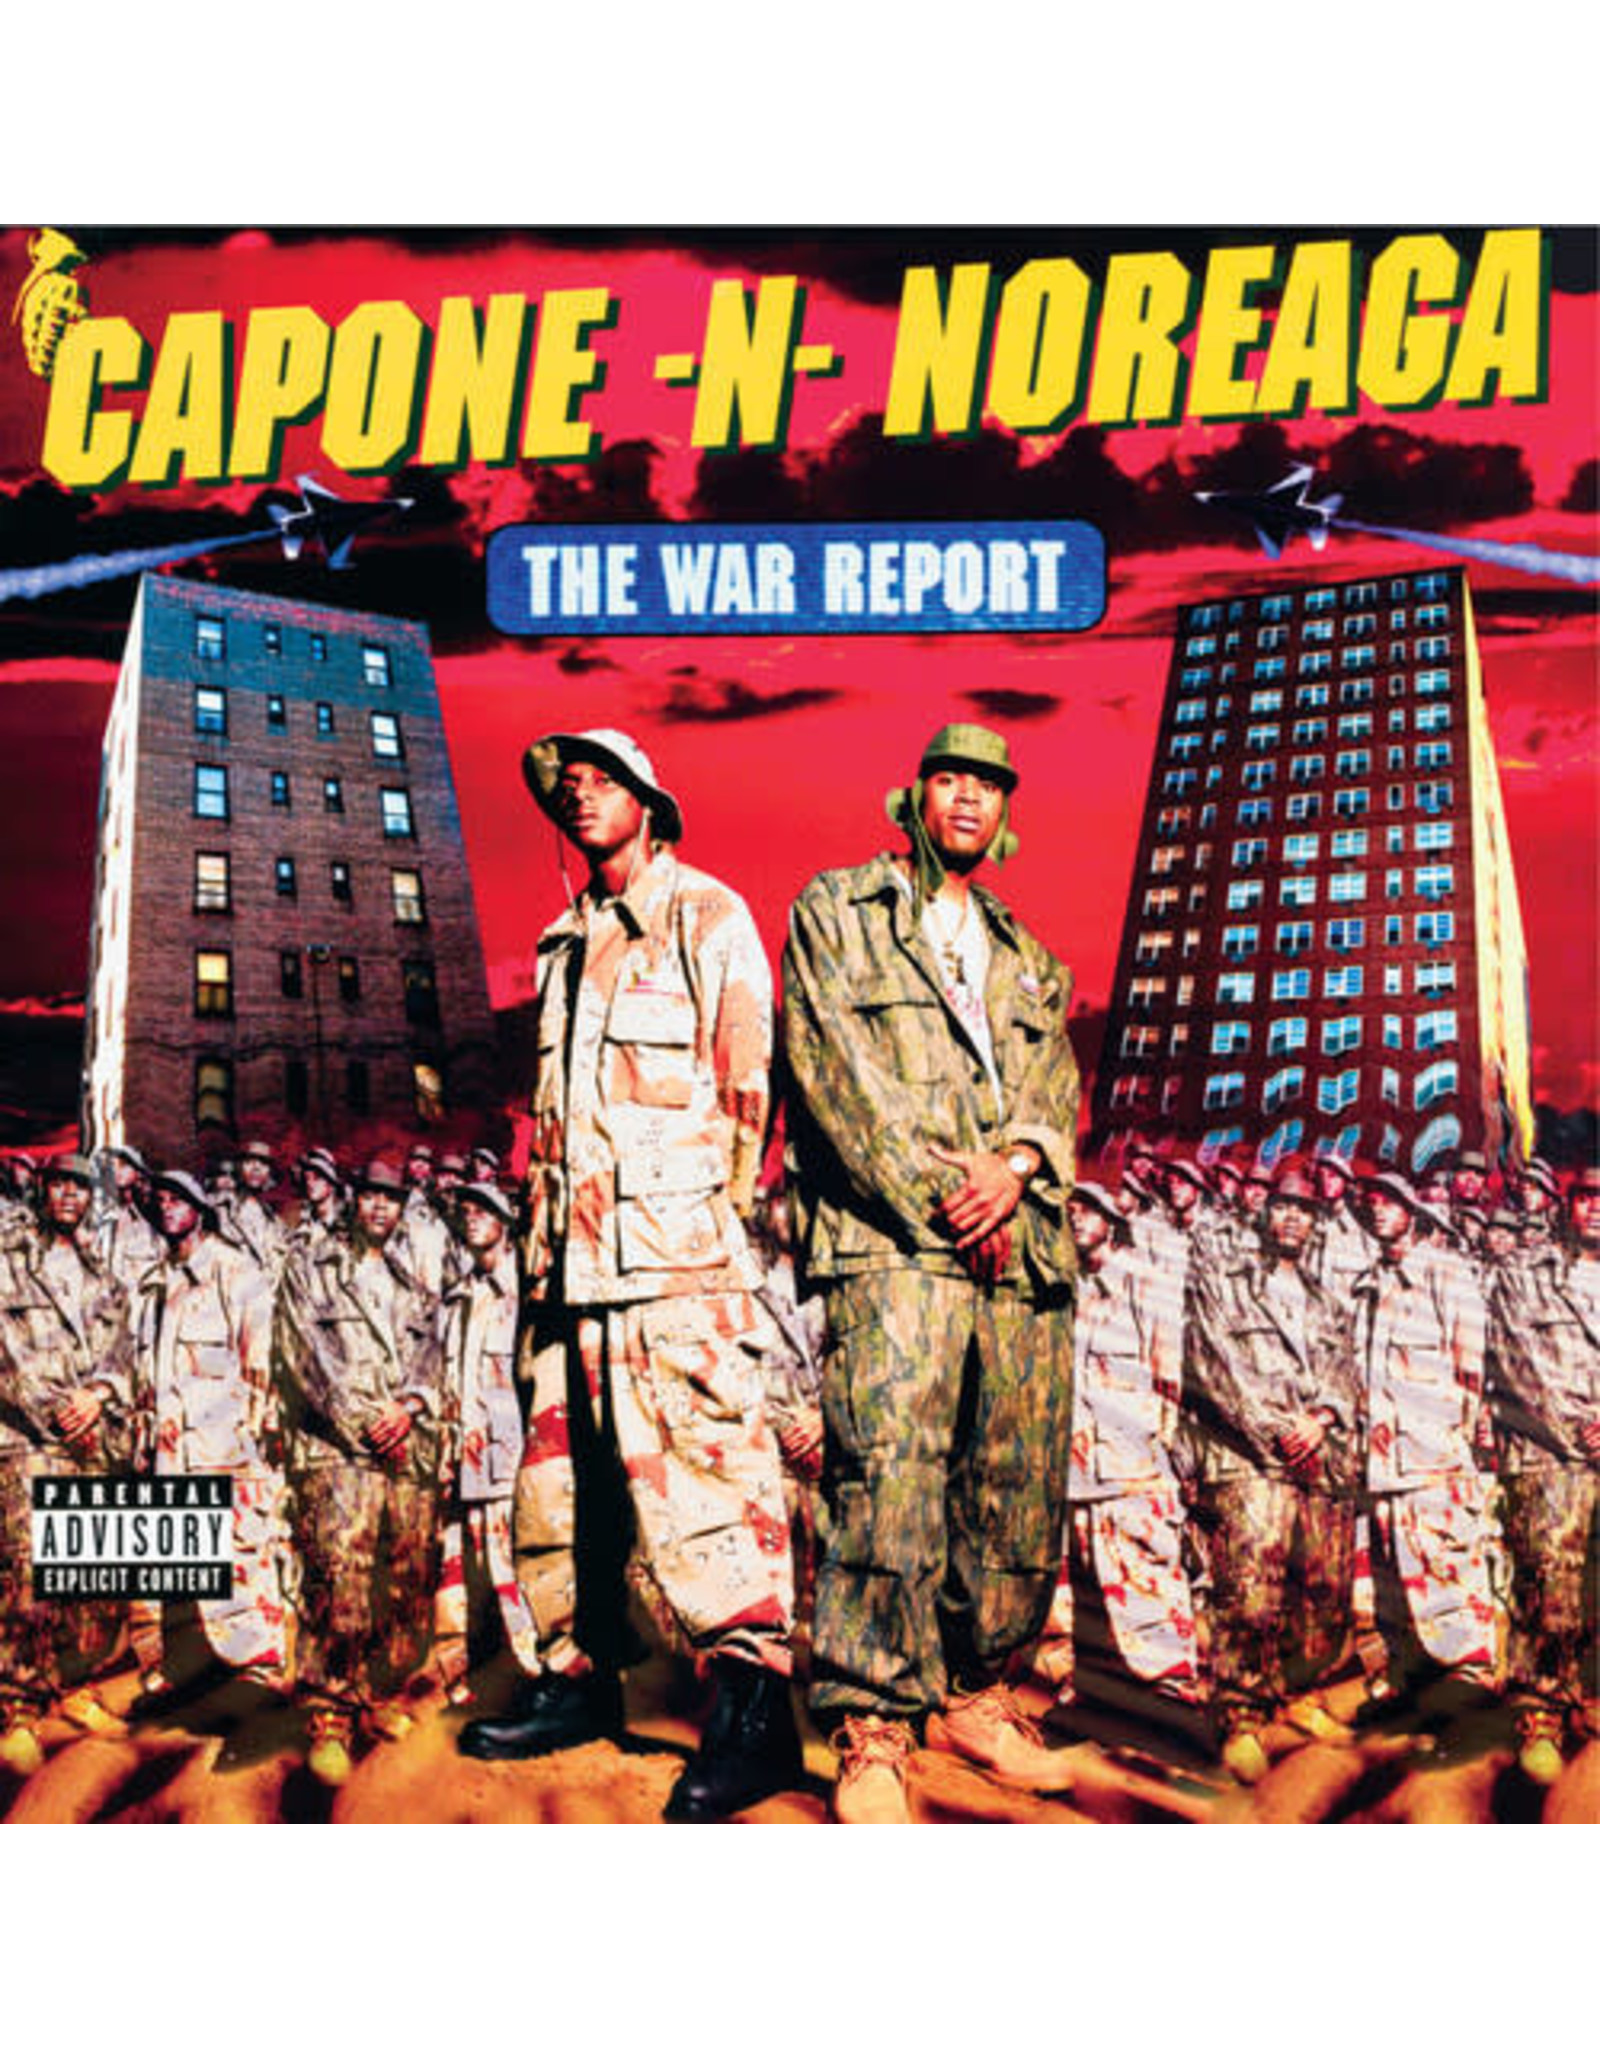 New Vinyl Capone -N- Noreaga - The War Report (Clear w/ Red & Blue Splatter) 2LP